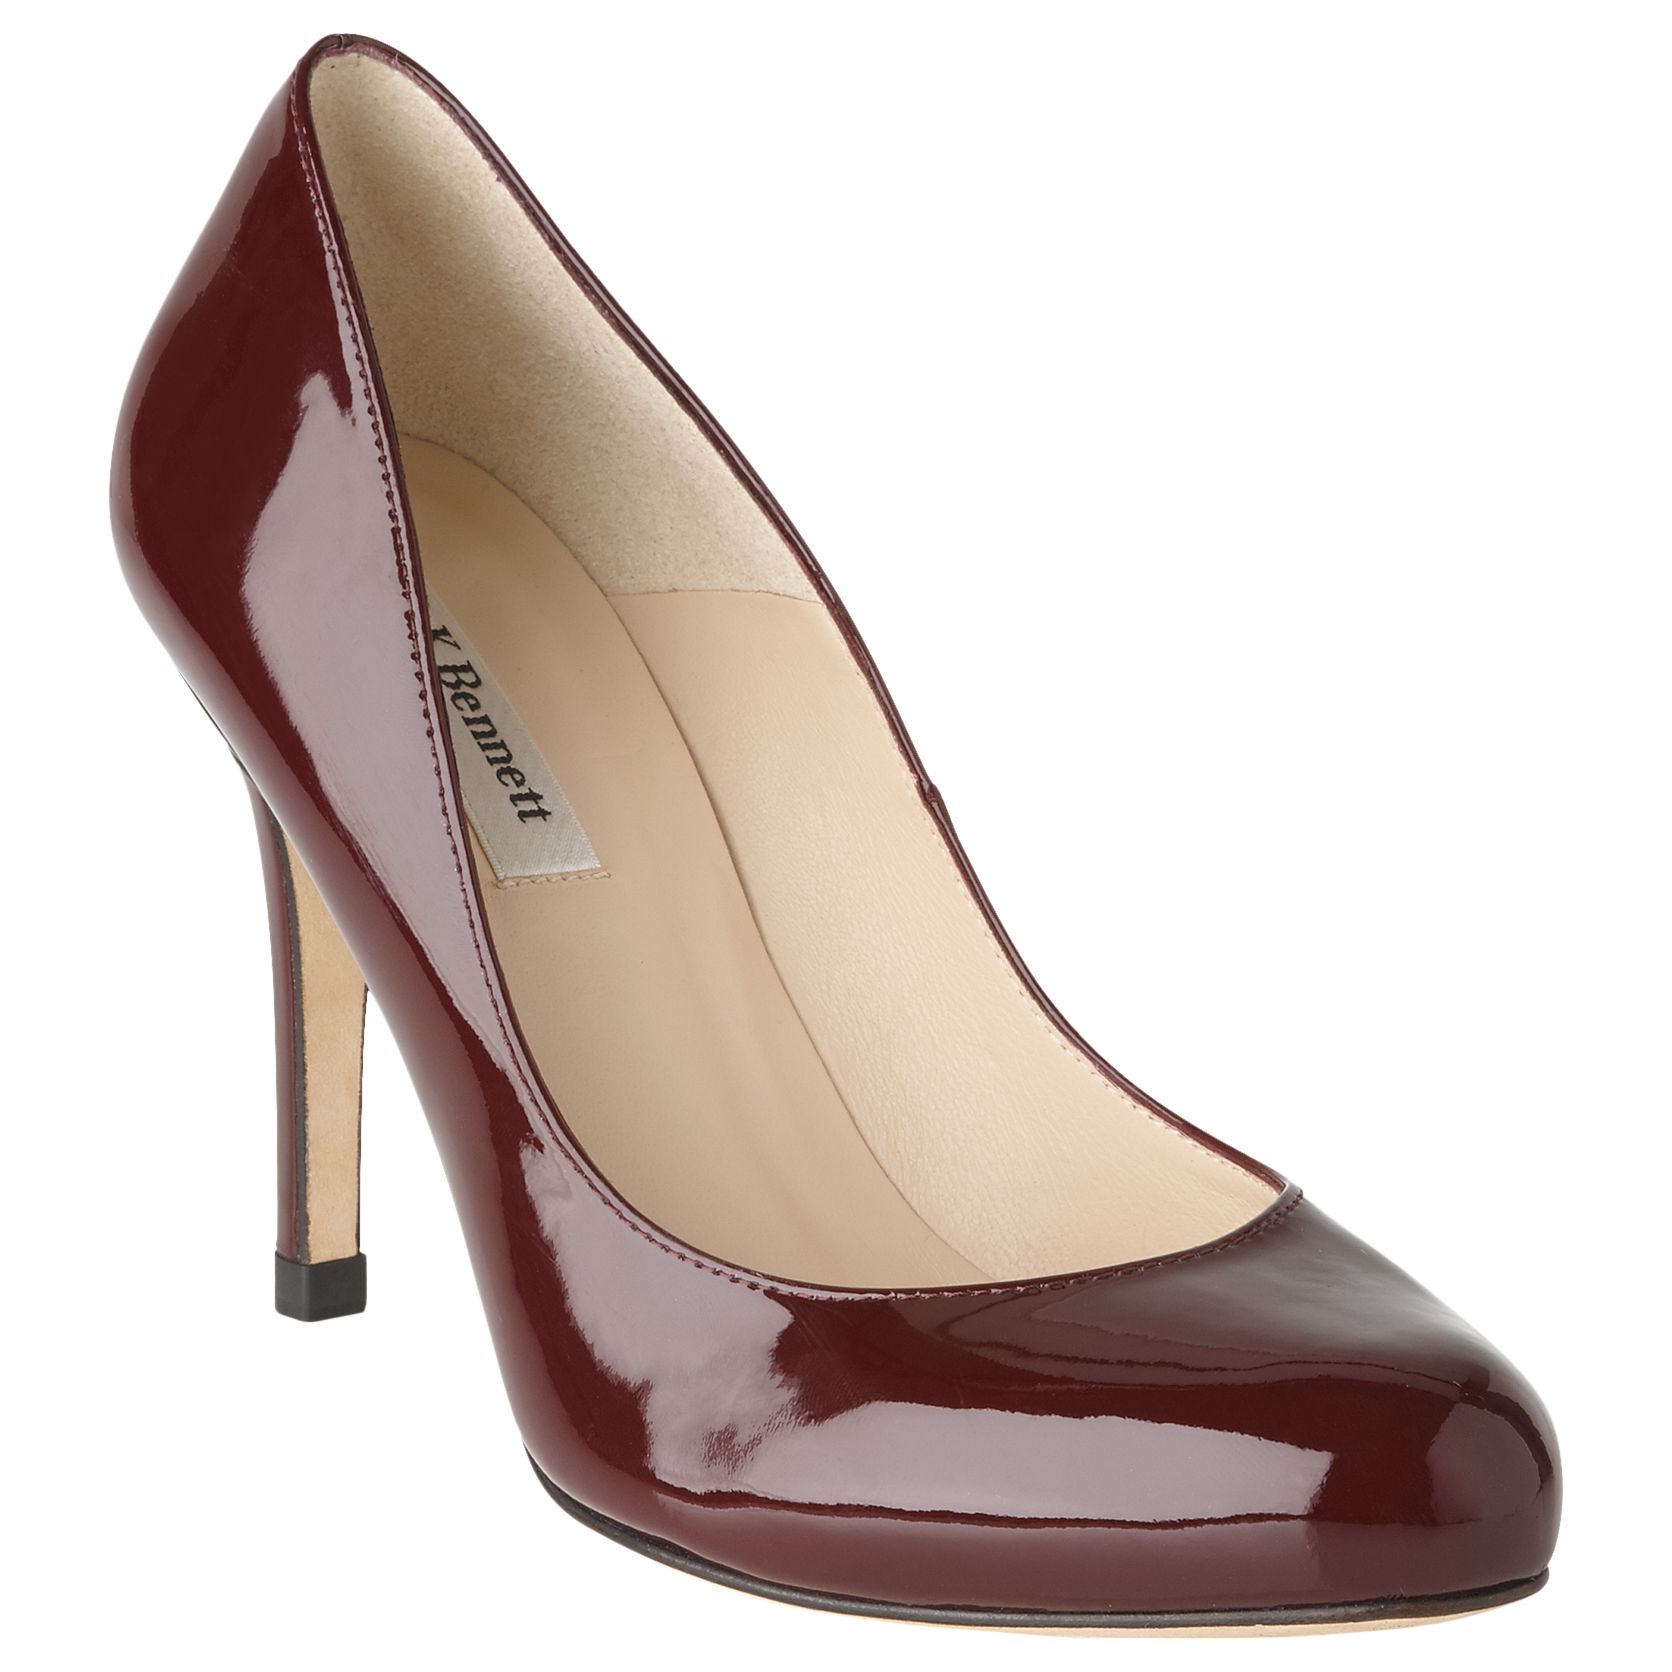 oxblood court shoes